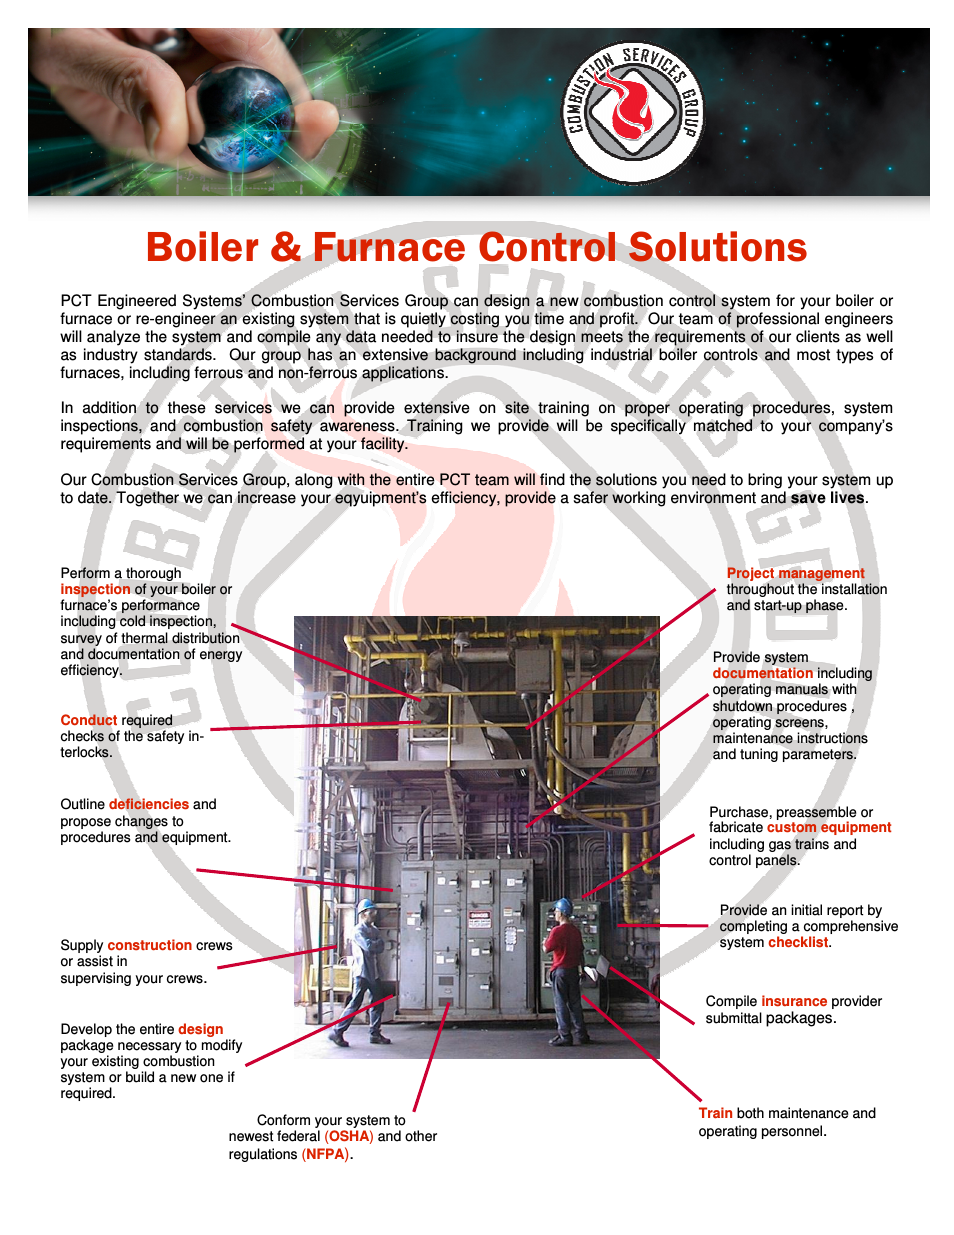 Boiler & Furnace Control Solutions